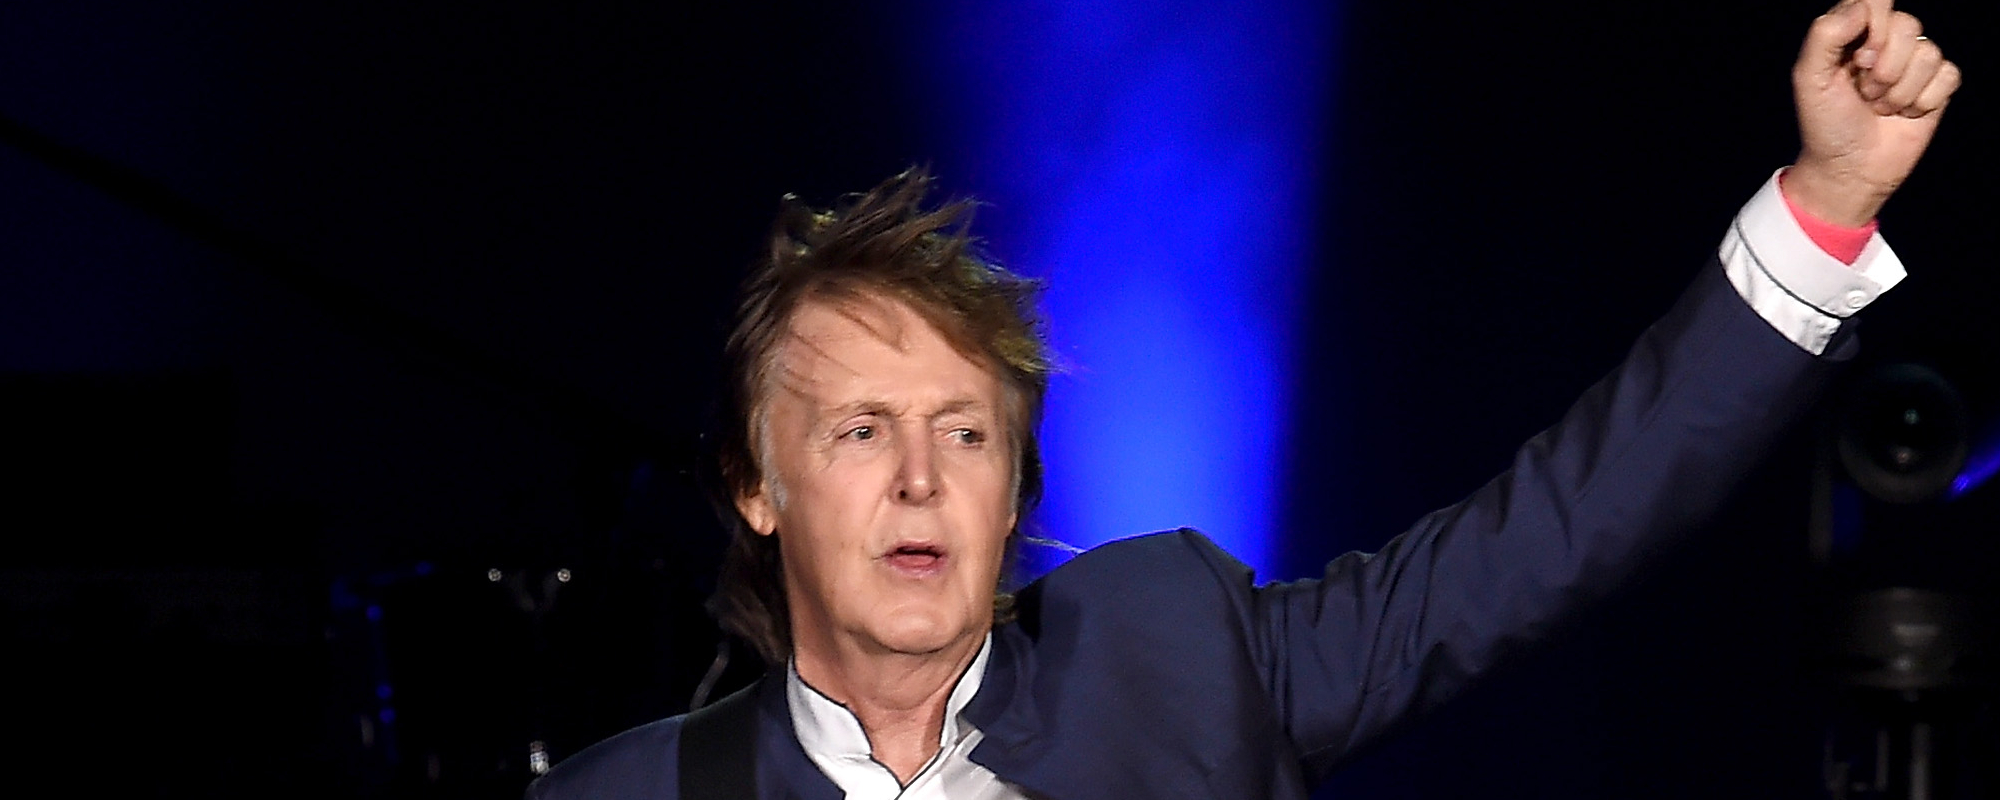 Paul McCartney Finally Responds To Loving Fan 60 Years Later, Extends Invite